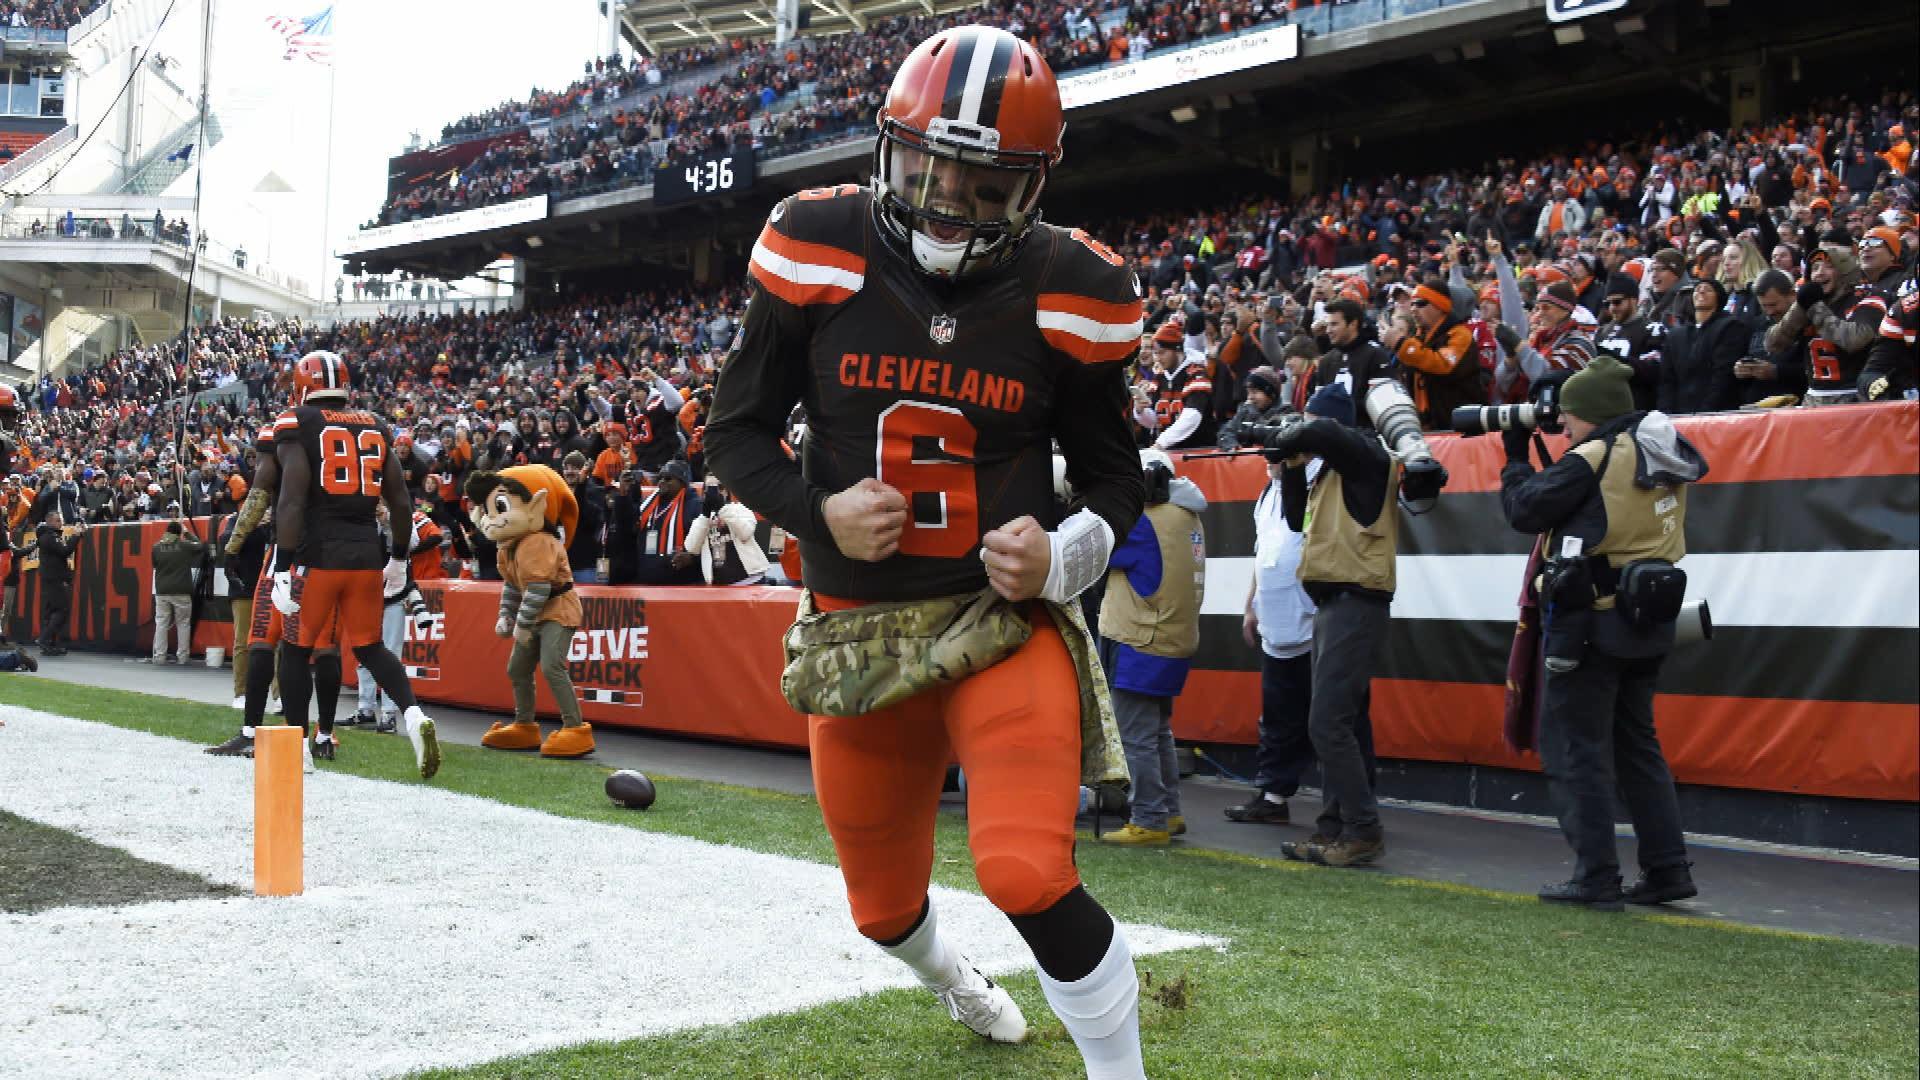 Baker Mayfield shines in the Cleveland Browns' win over the Atlanta